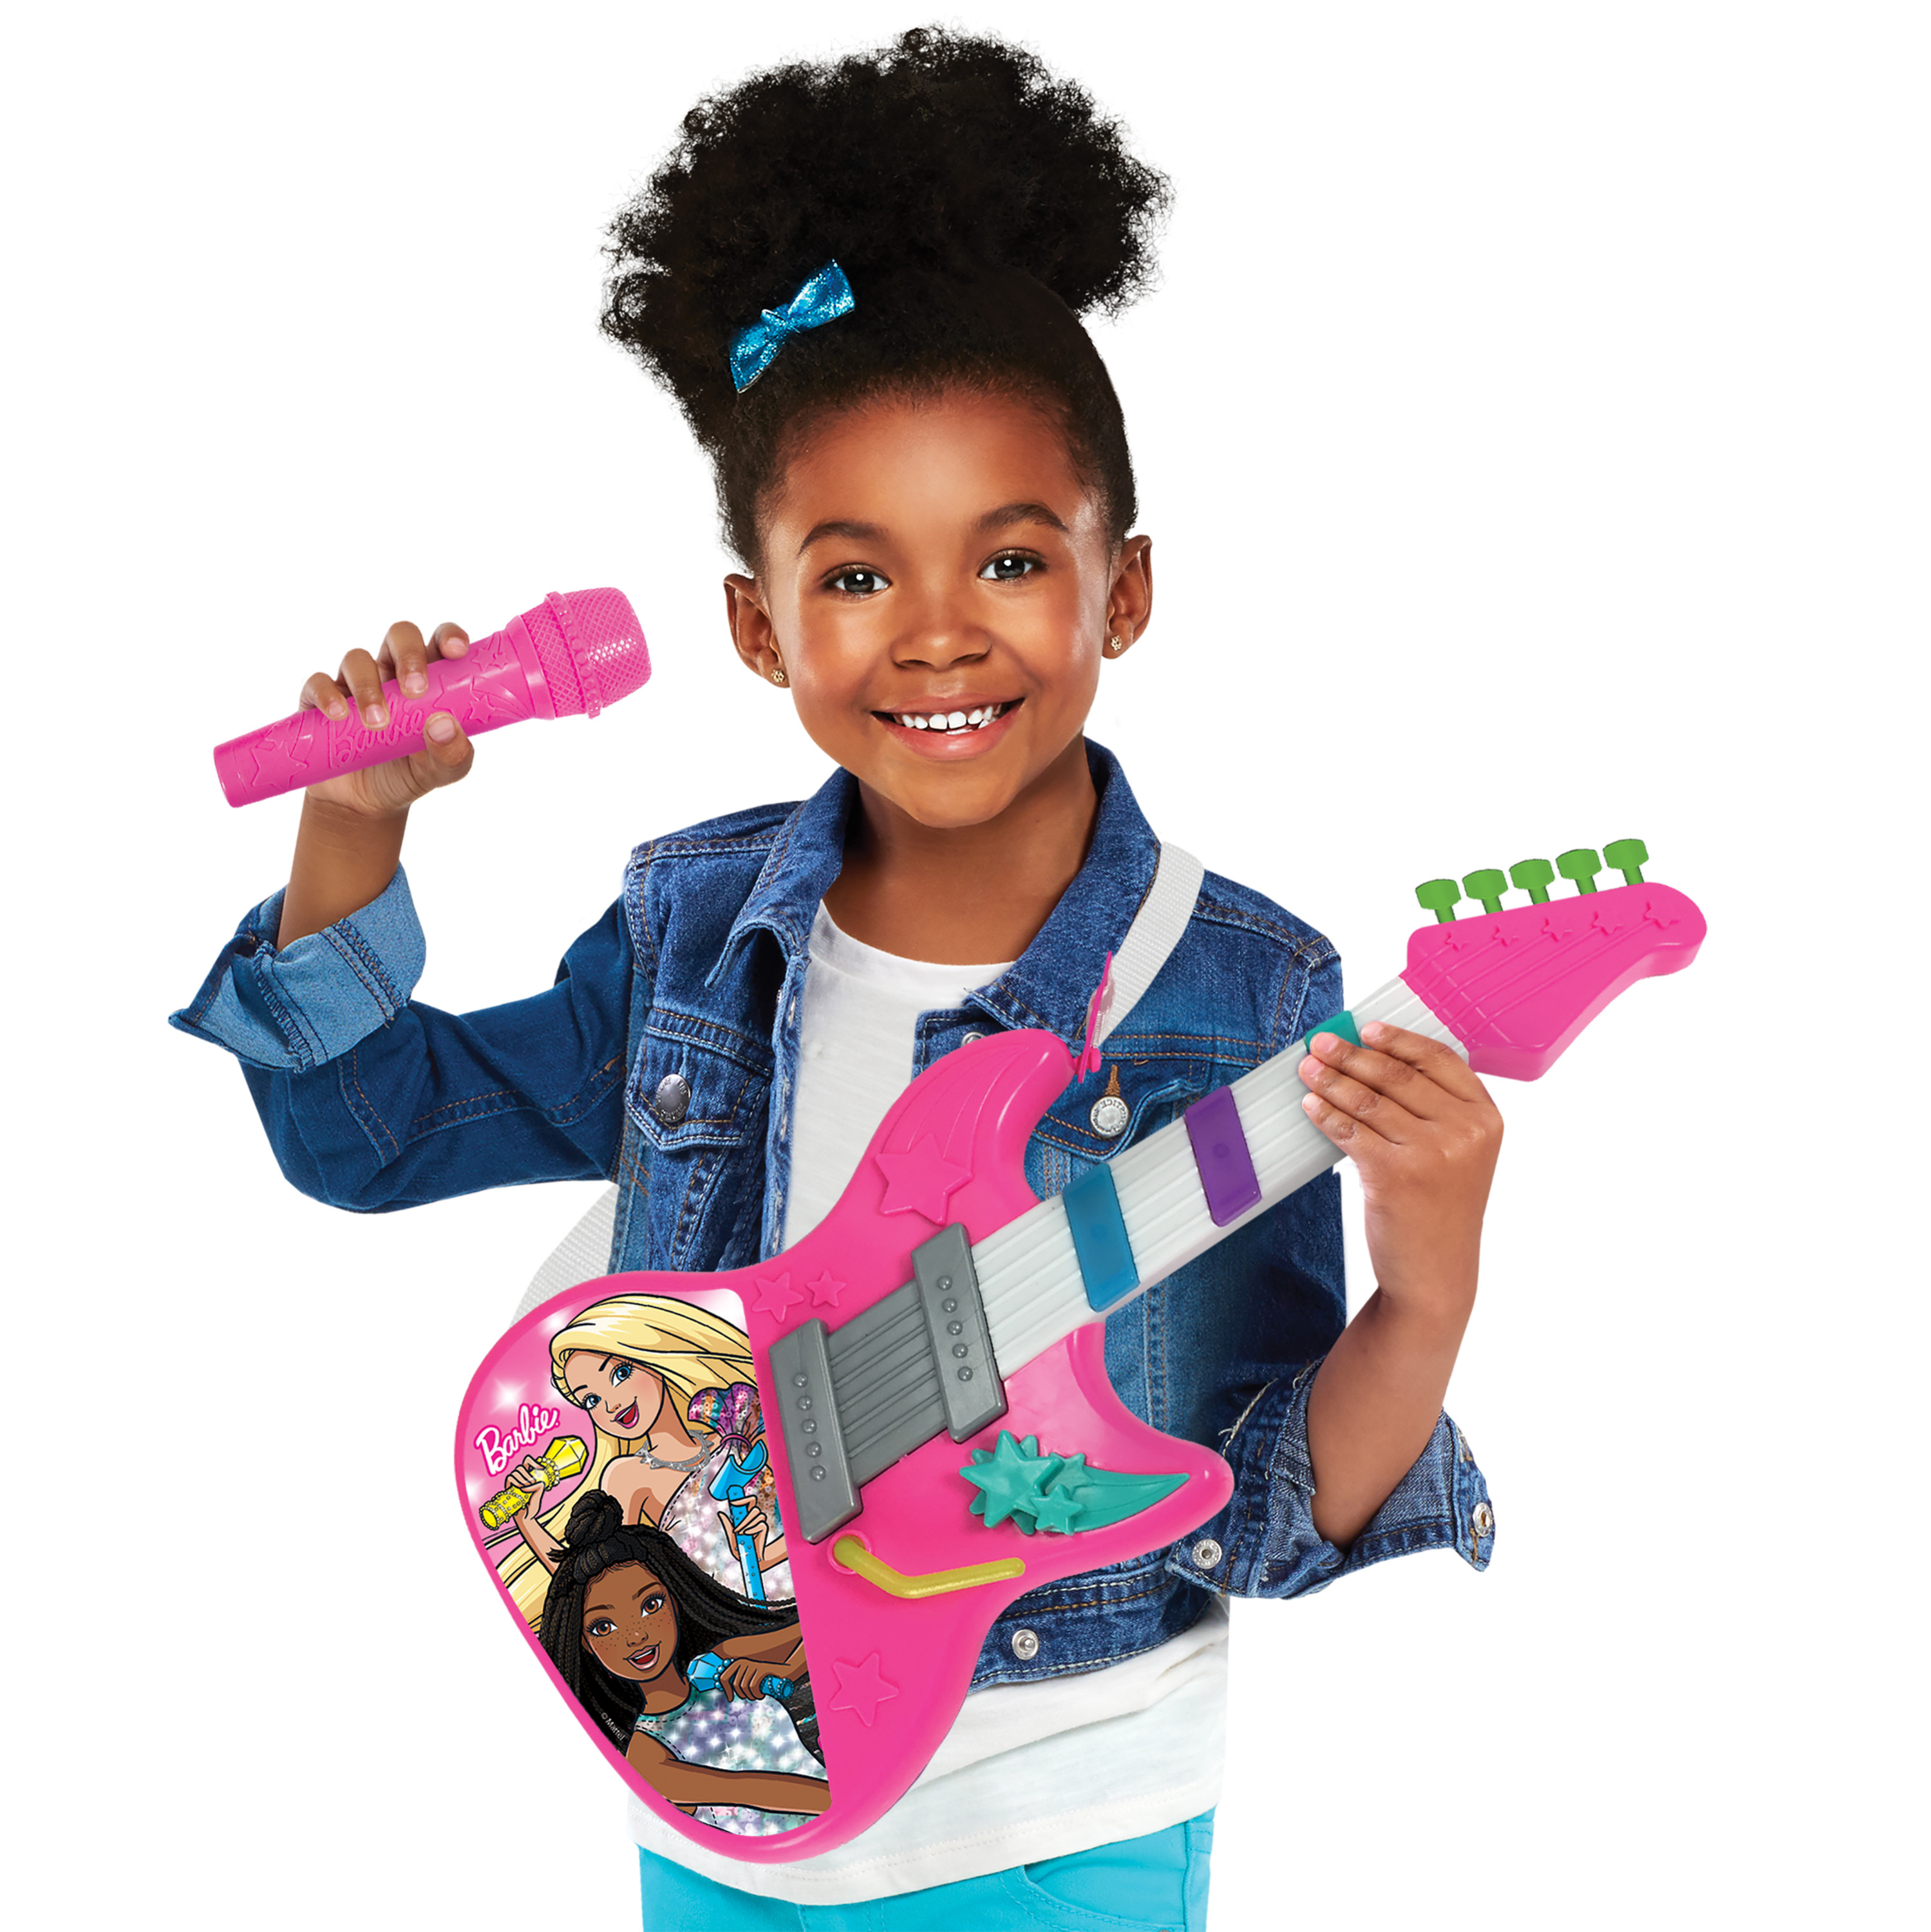 Barbie Rock Star Guitar, Interactive Electronic Toy Guitar with Lights, Sounds, and Microphone,  Kids Toys for Ages 3 Up, Gifts and Presents - image 3 of 11